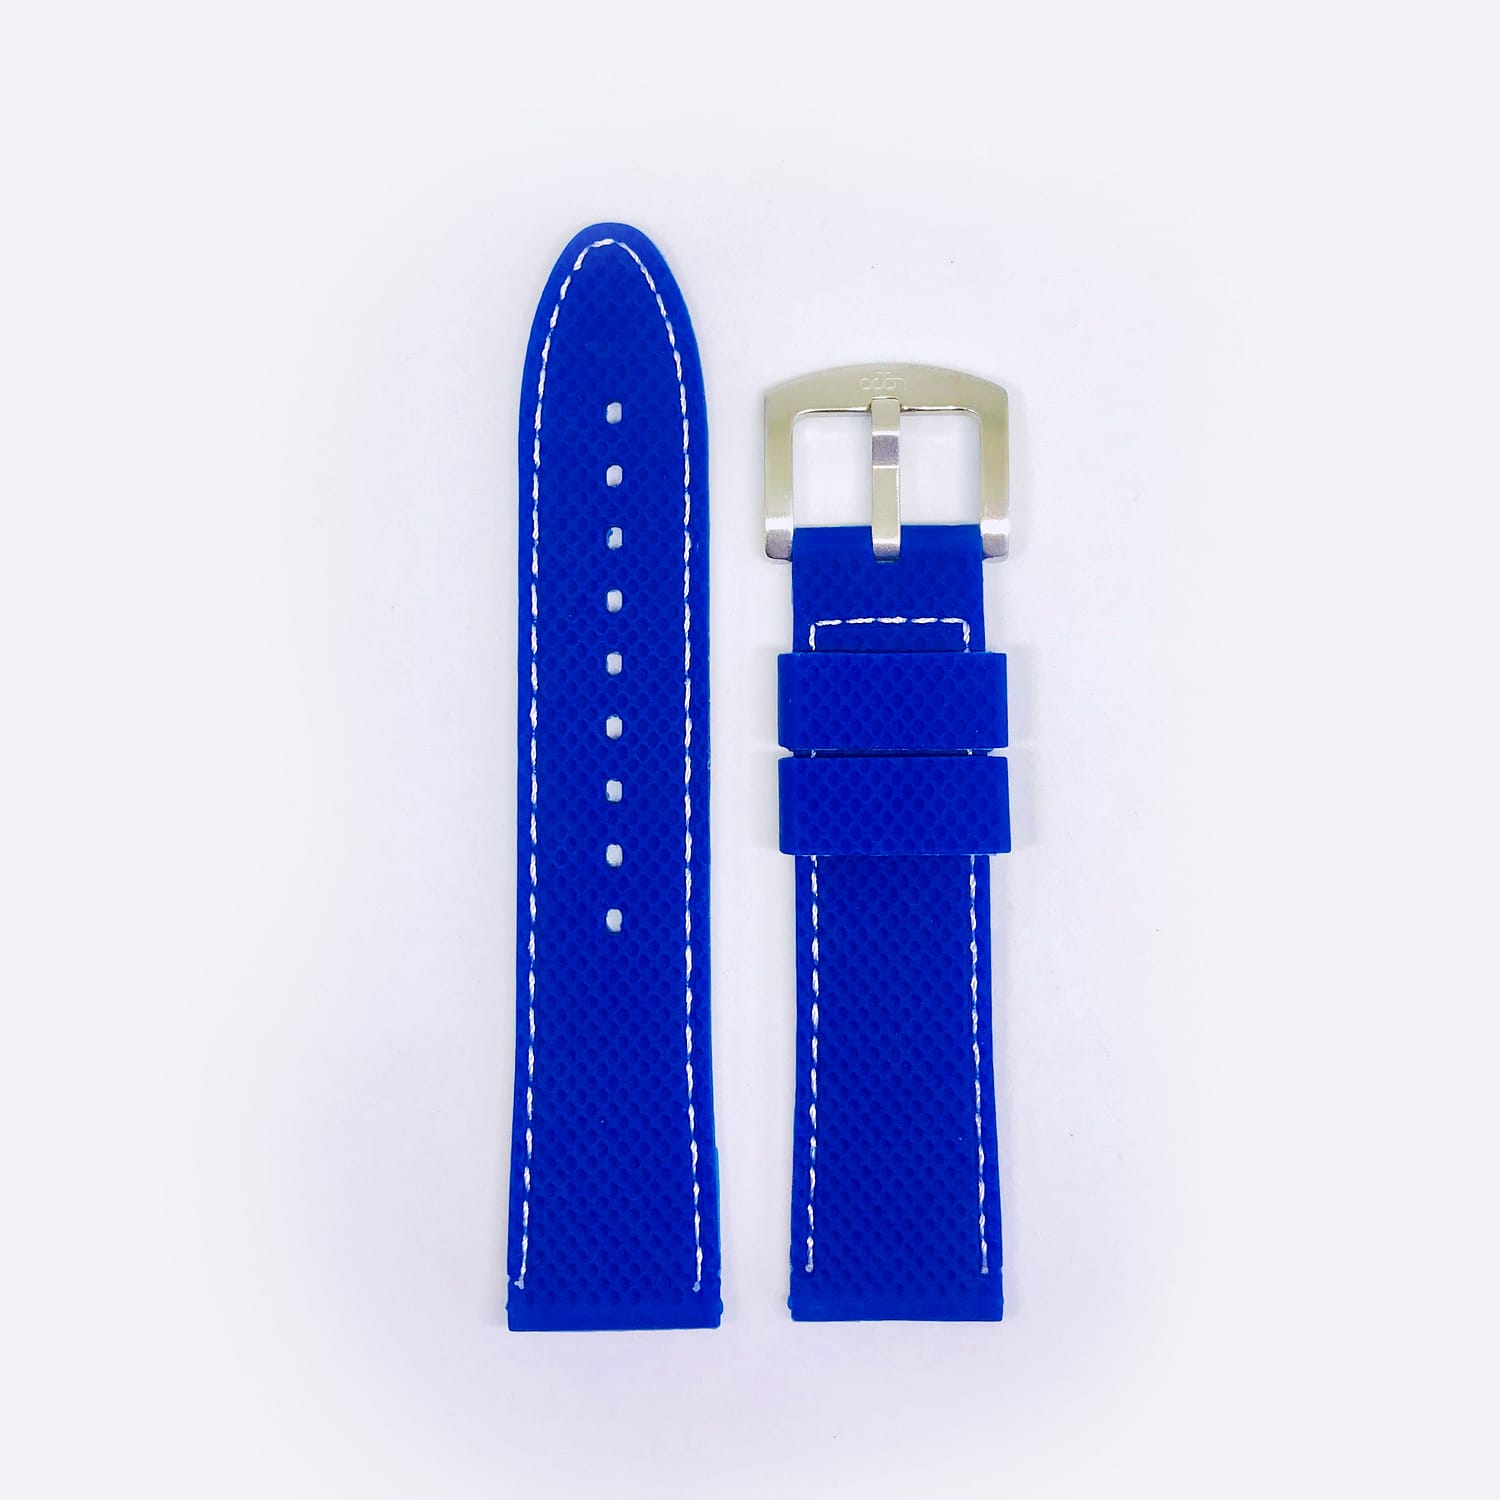 Blue Textured Rubber with White Stitch